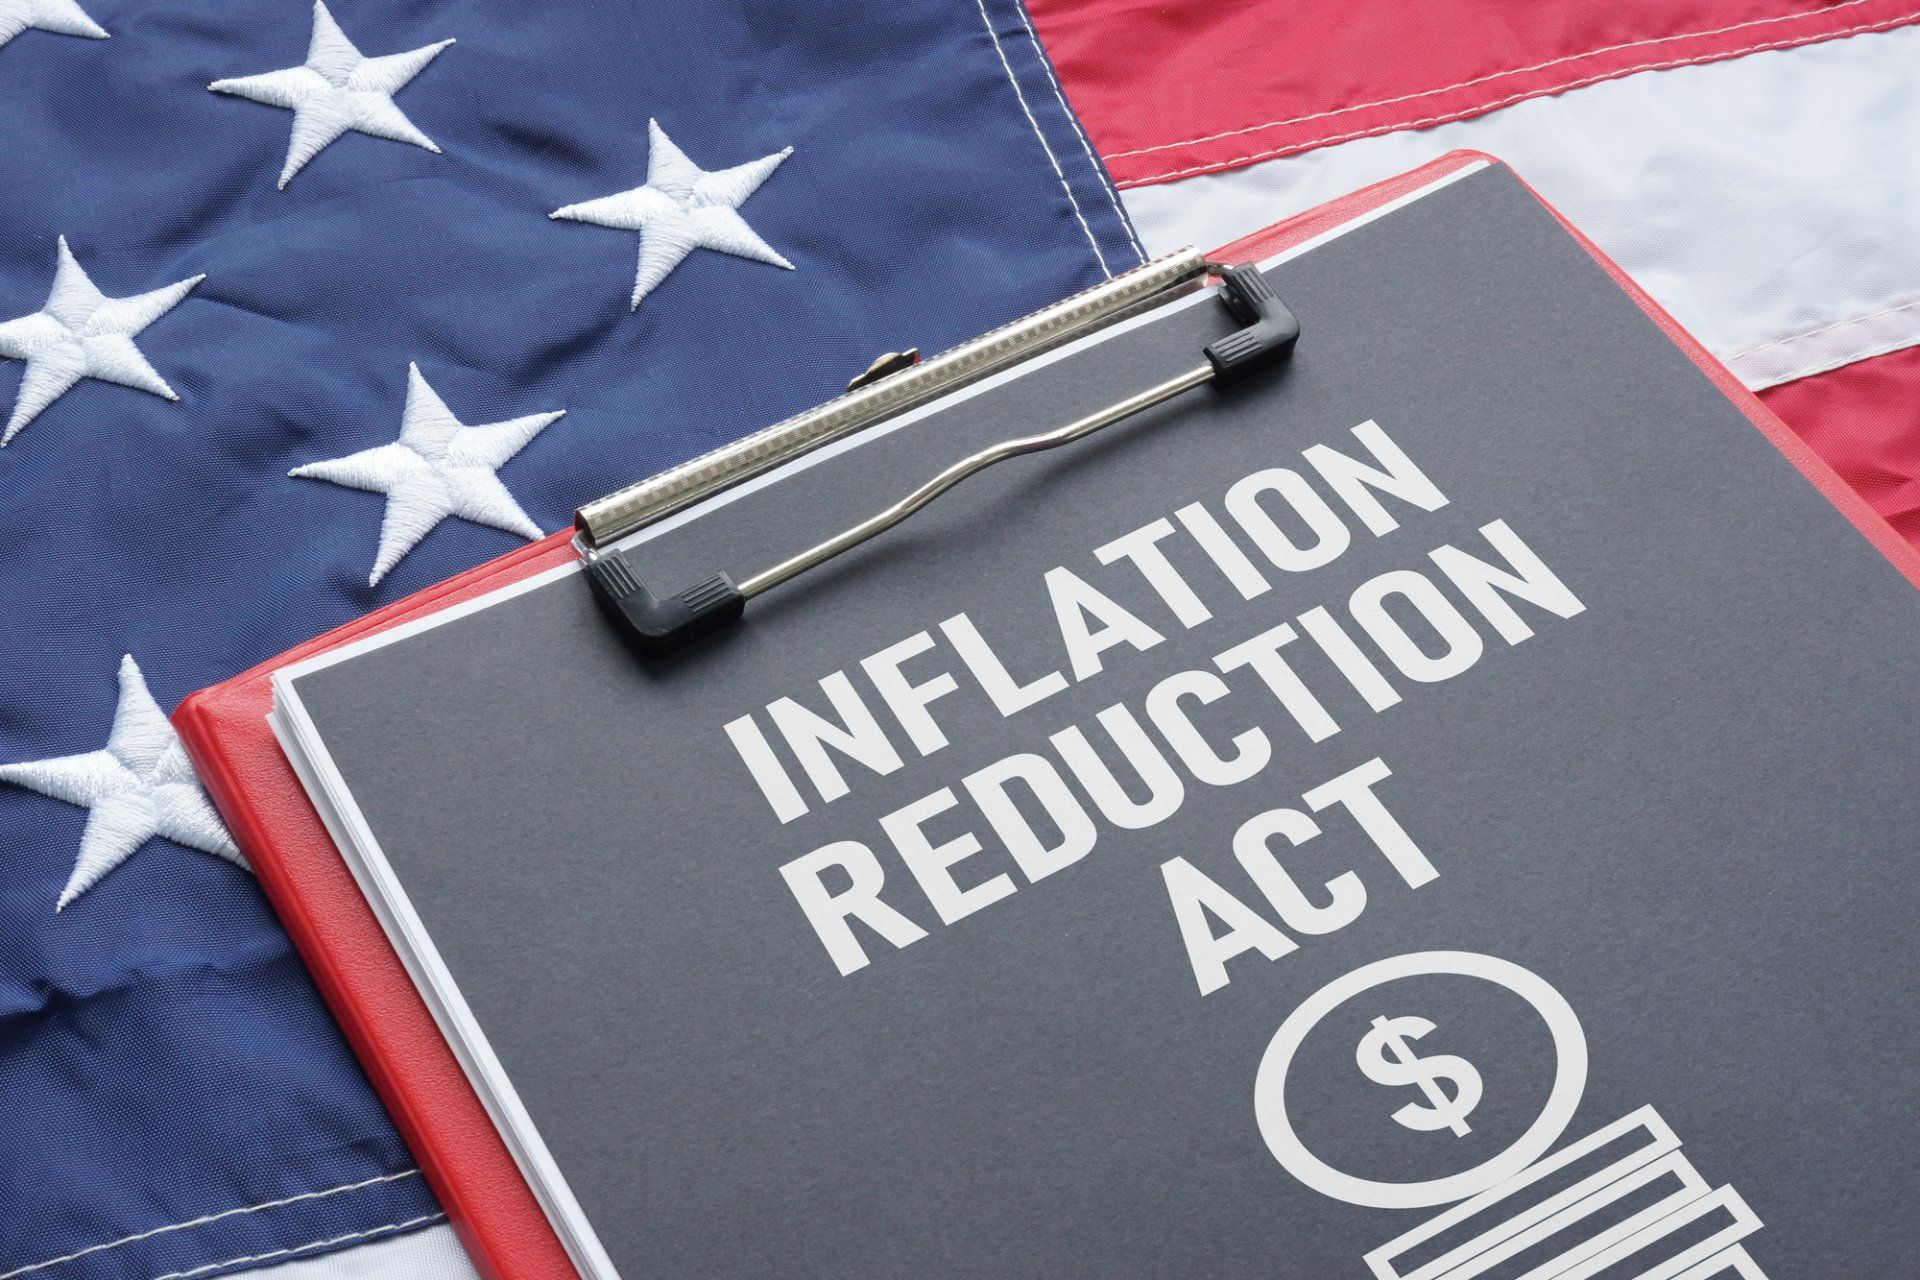 Inflation Tax Reduction